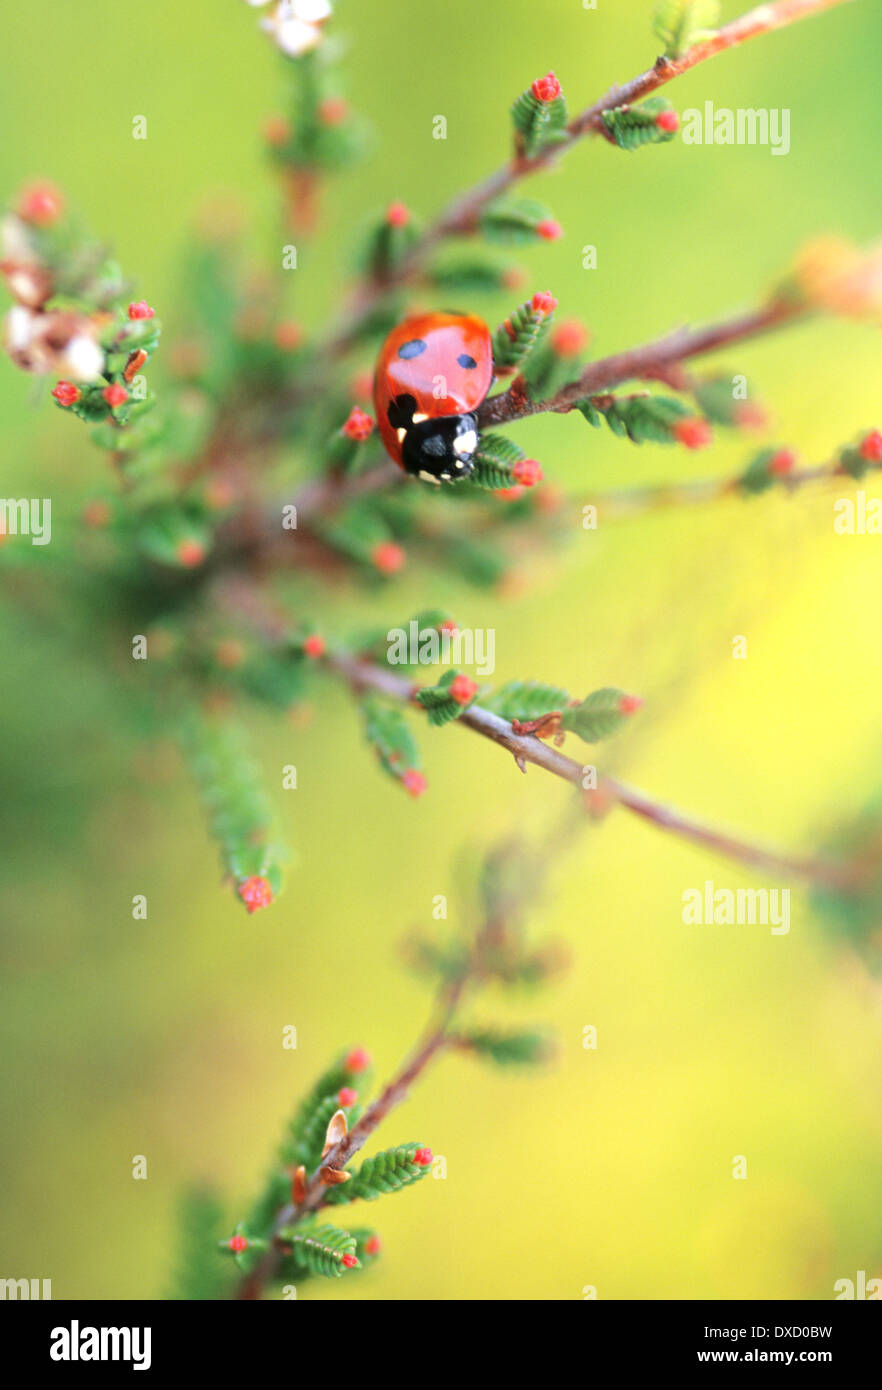 Editorial image of a Ladybird in close up Stock Photo